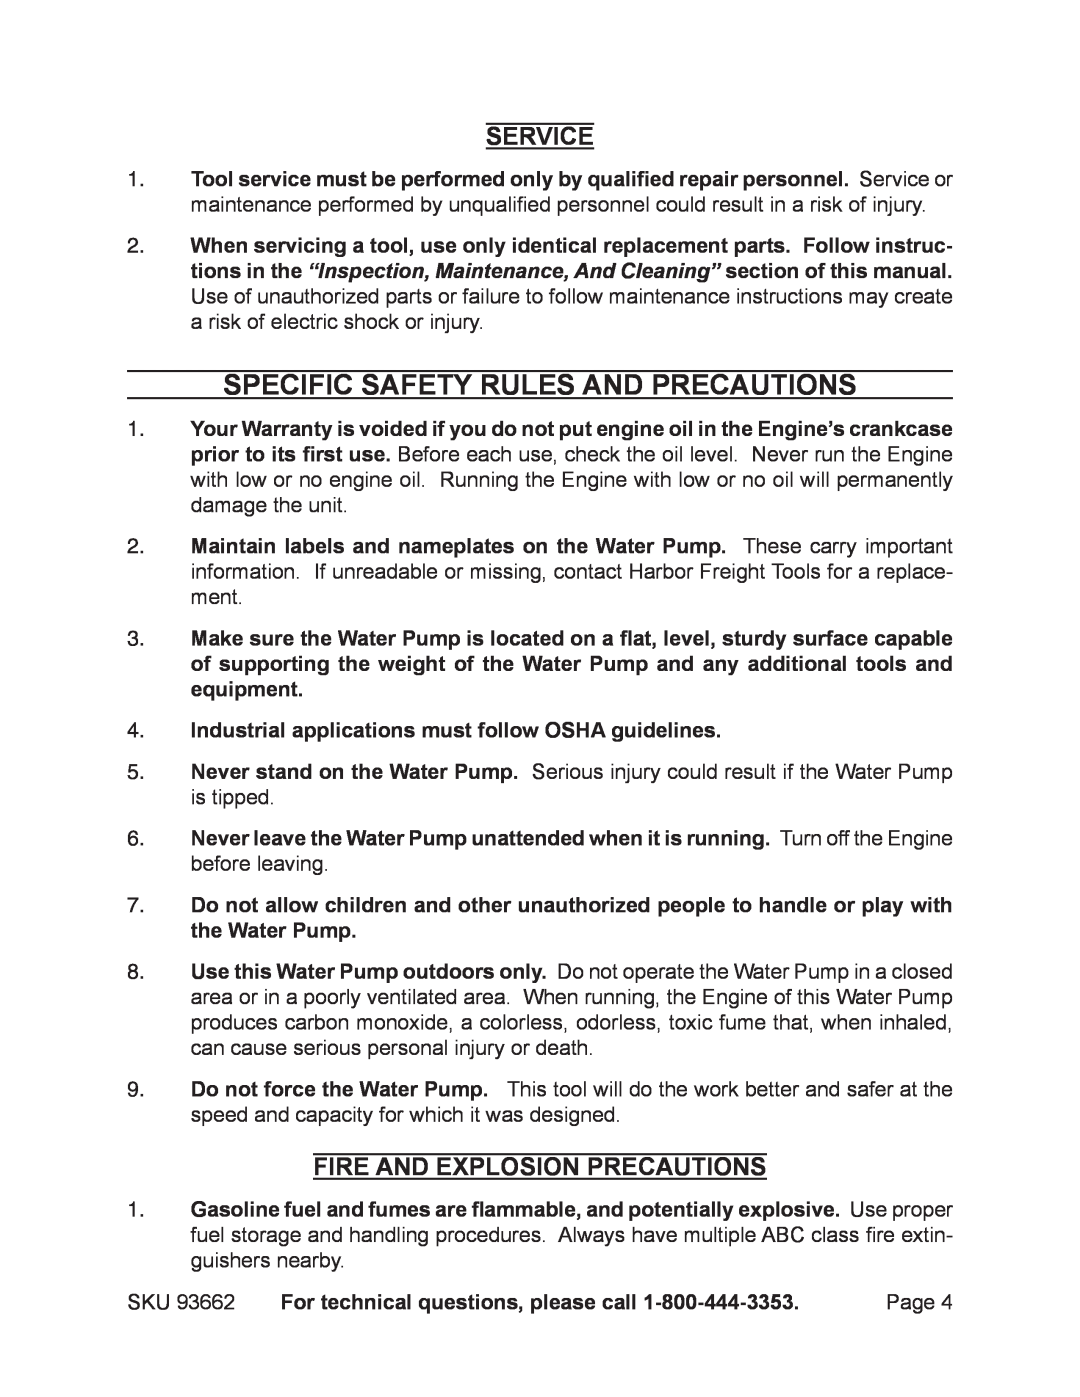 Harbor Freight Tools 93662 manual Specific Safety Rules And Precautions, Service, Fire And Explosion Precautions 